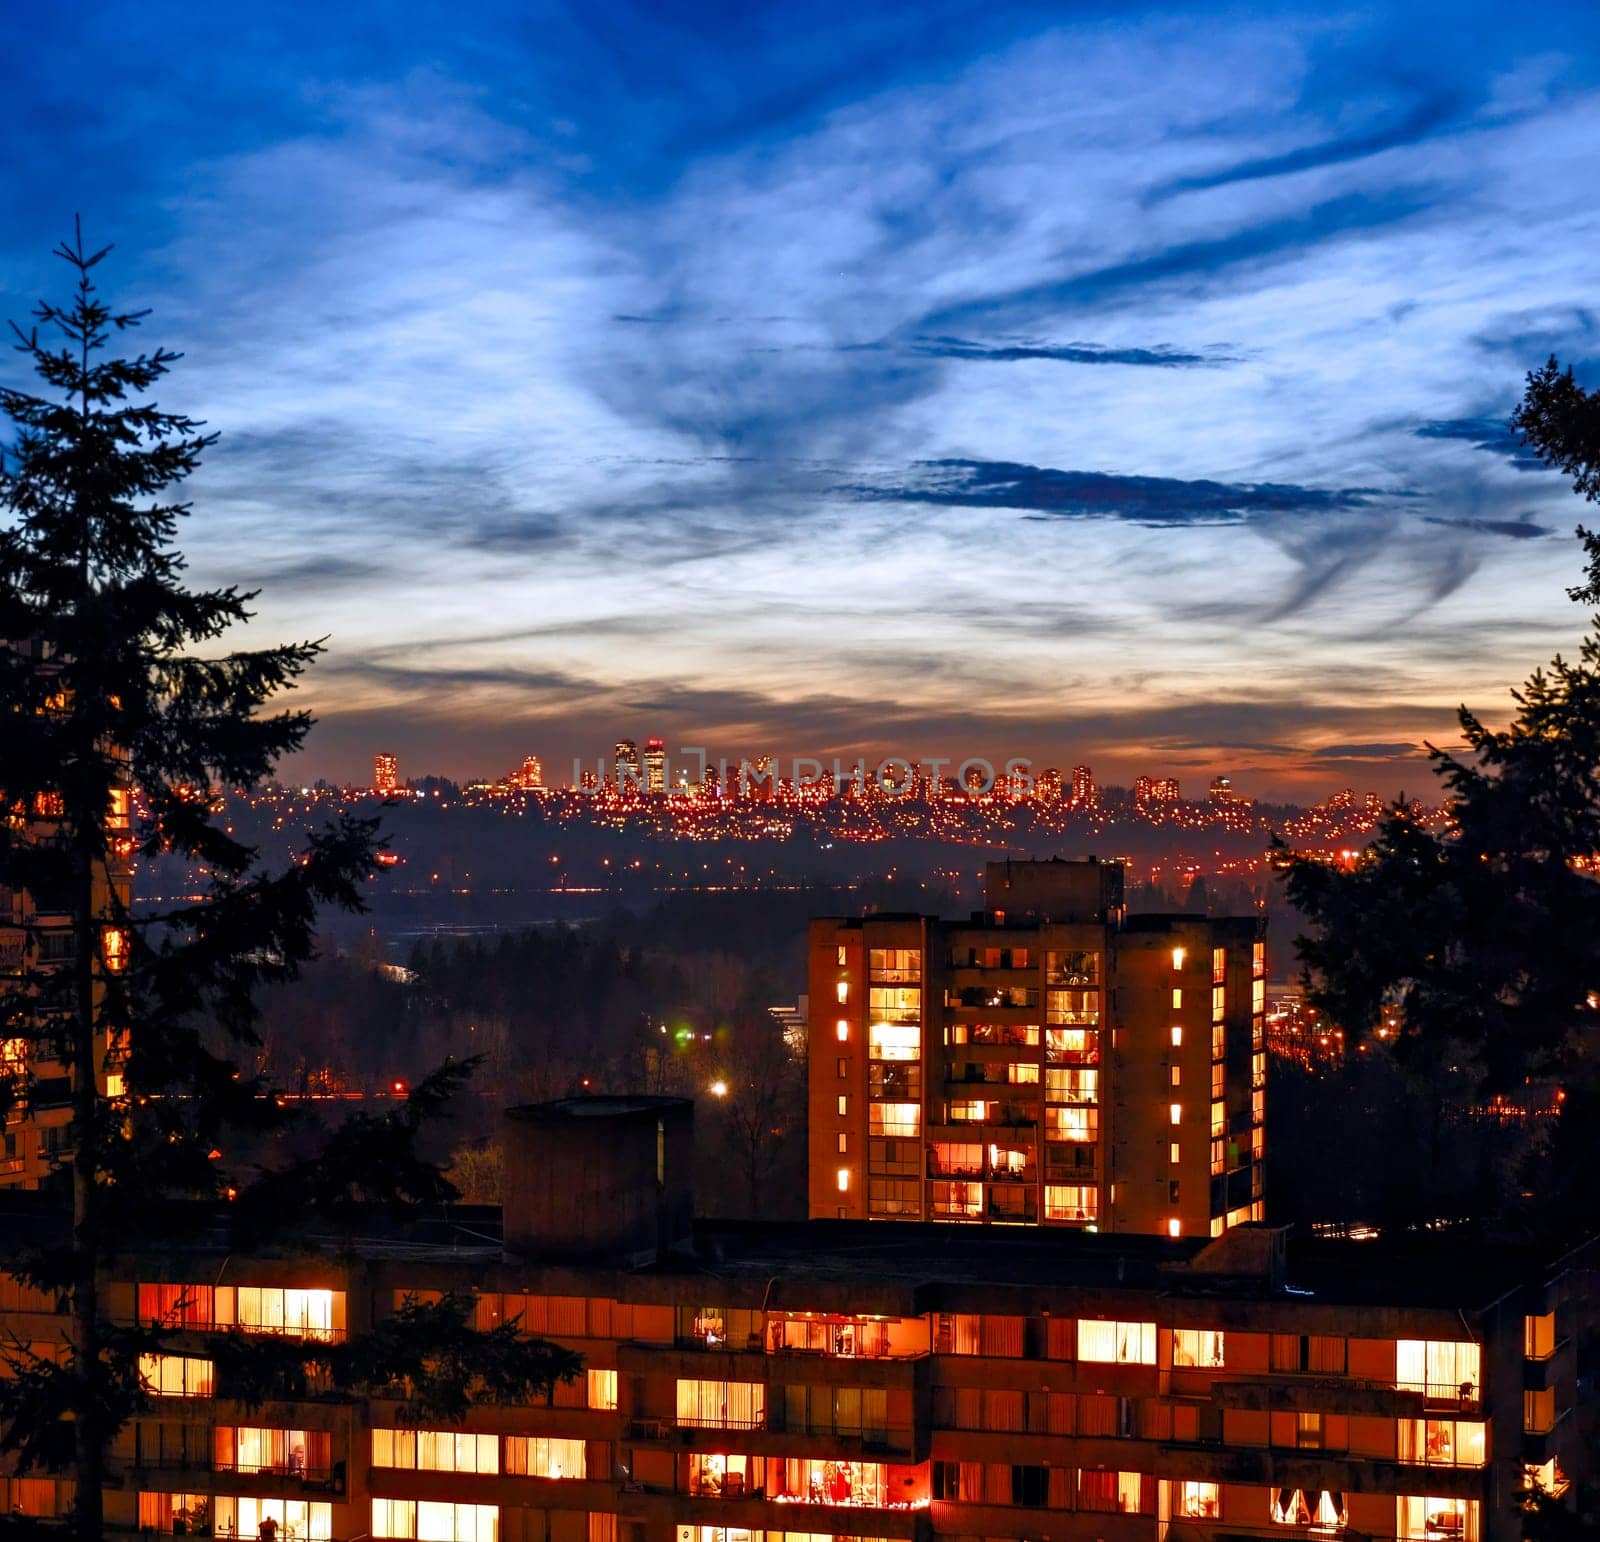 Big city night landscape after sunset in Vancouver, Canada by Imagenet